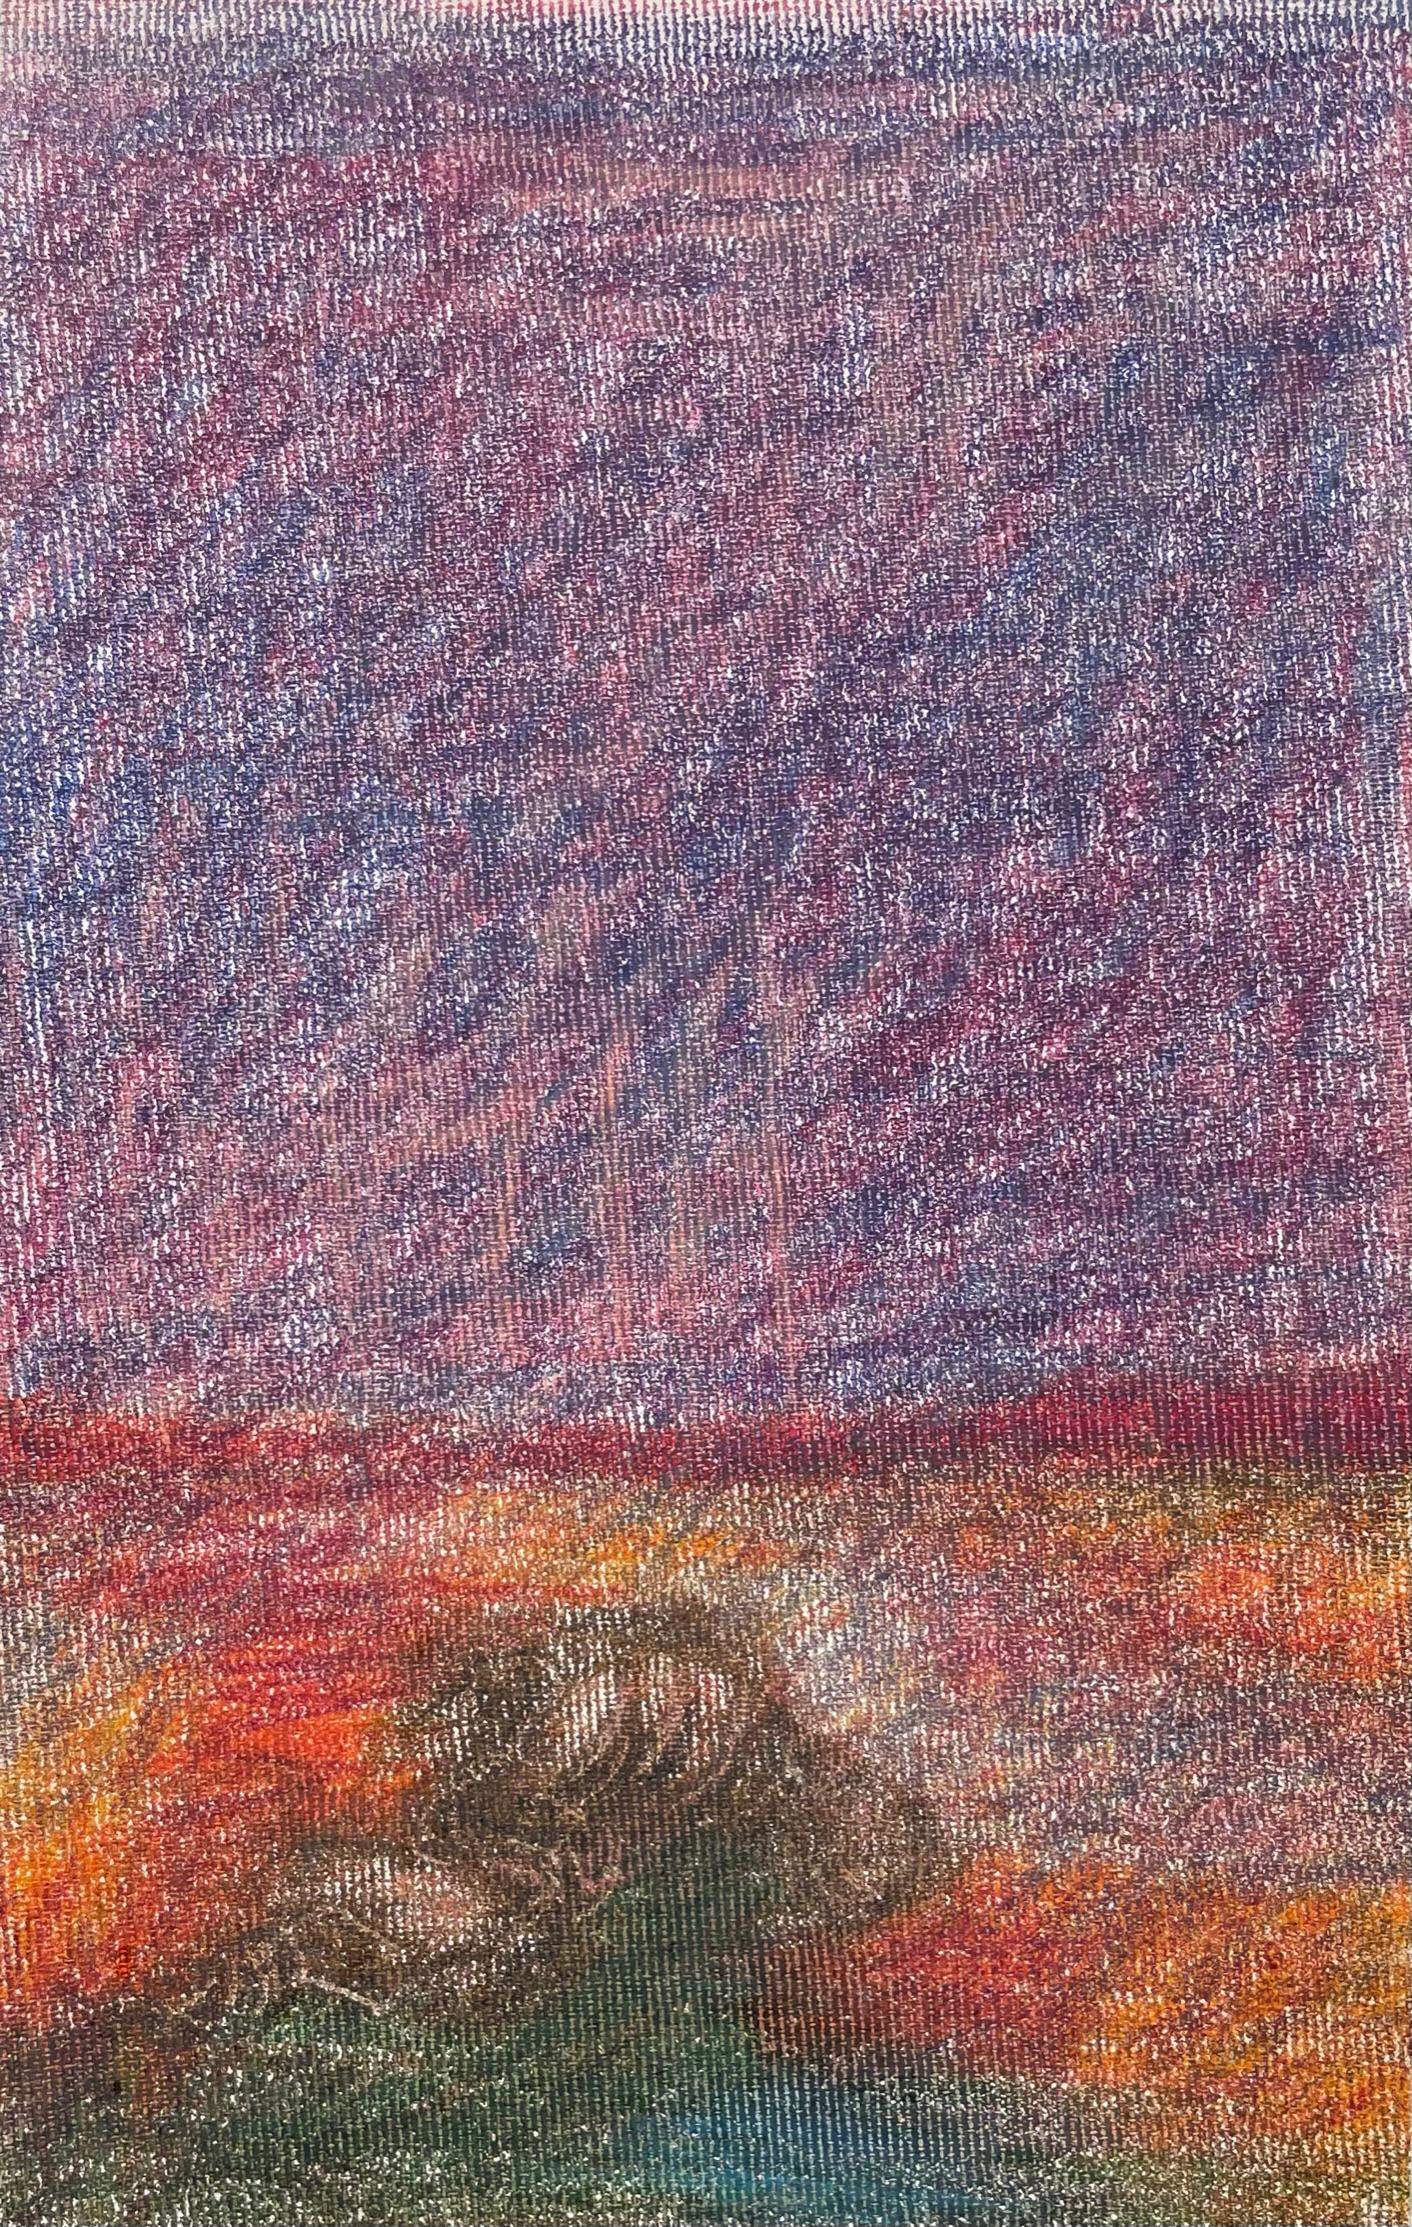 Body in the Field n°1 - Rouge, paysage, crayon de couleur, dessin